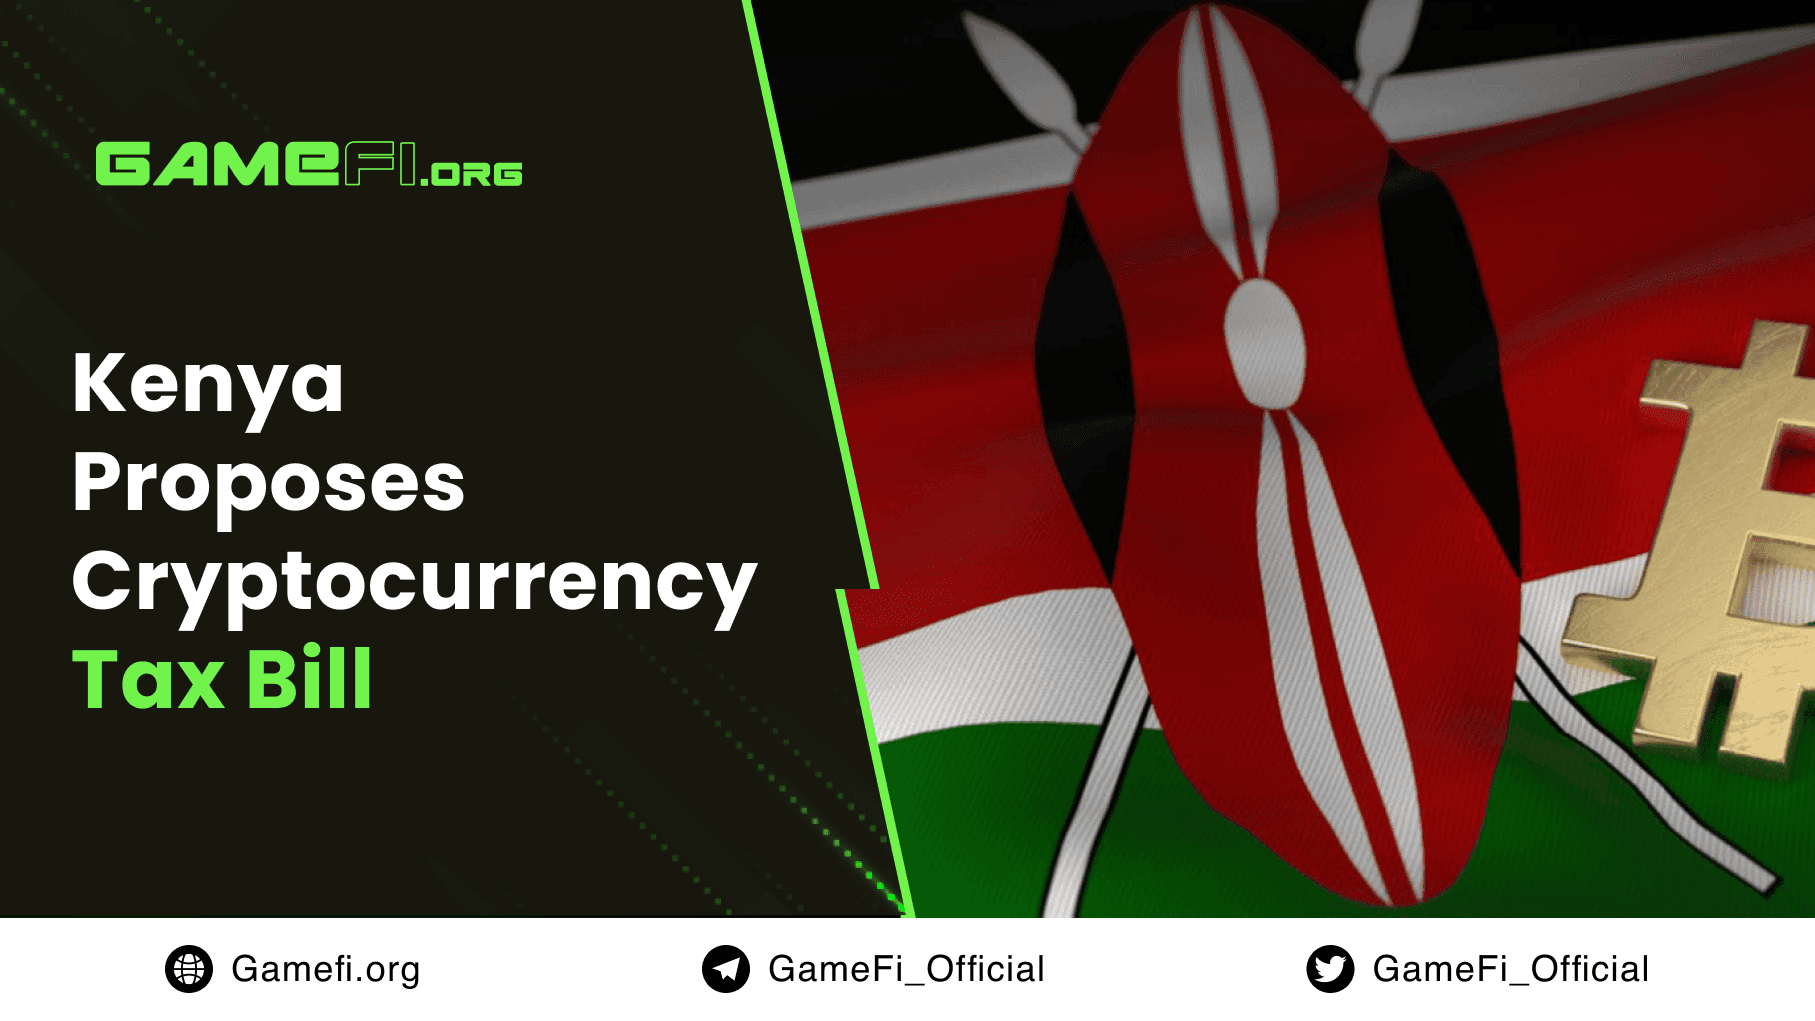 Kenya Proposes Cryptocurrency Tax Bill